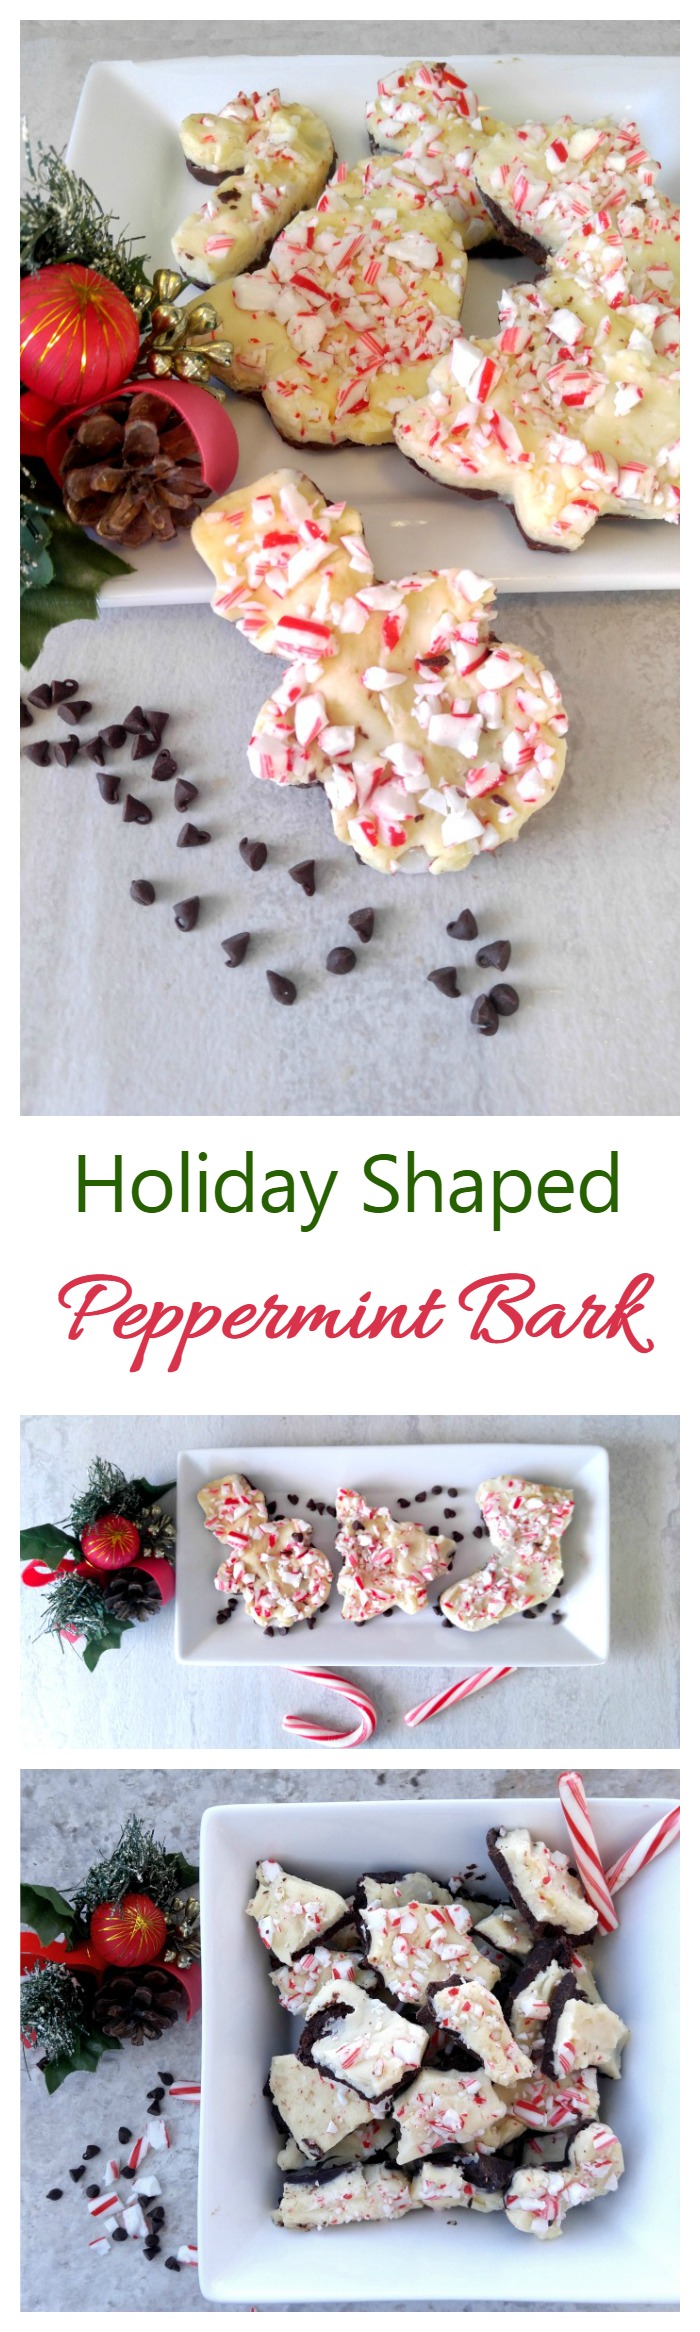 Peppermint Bark Recipe with Holiday Shapes